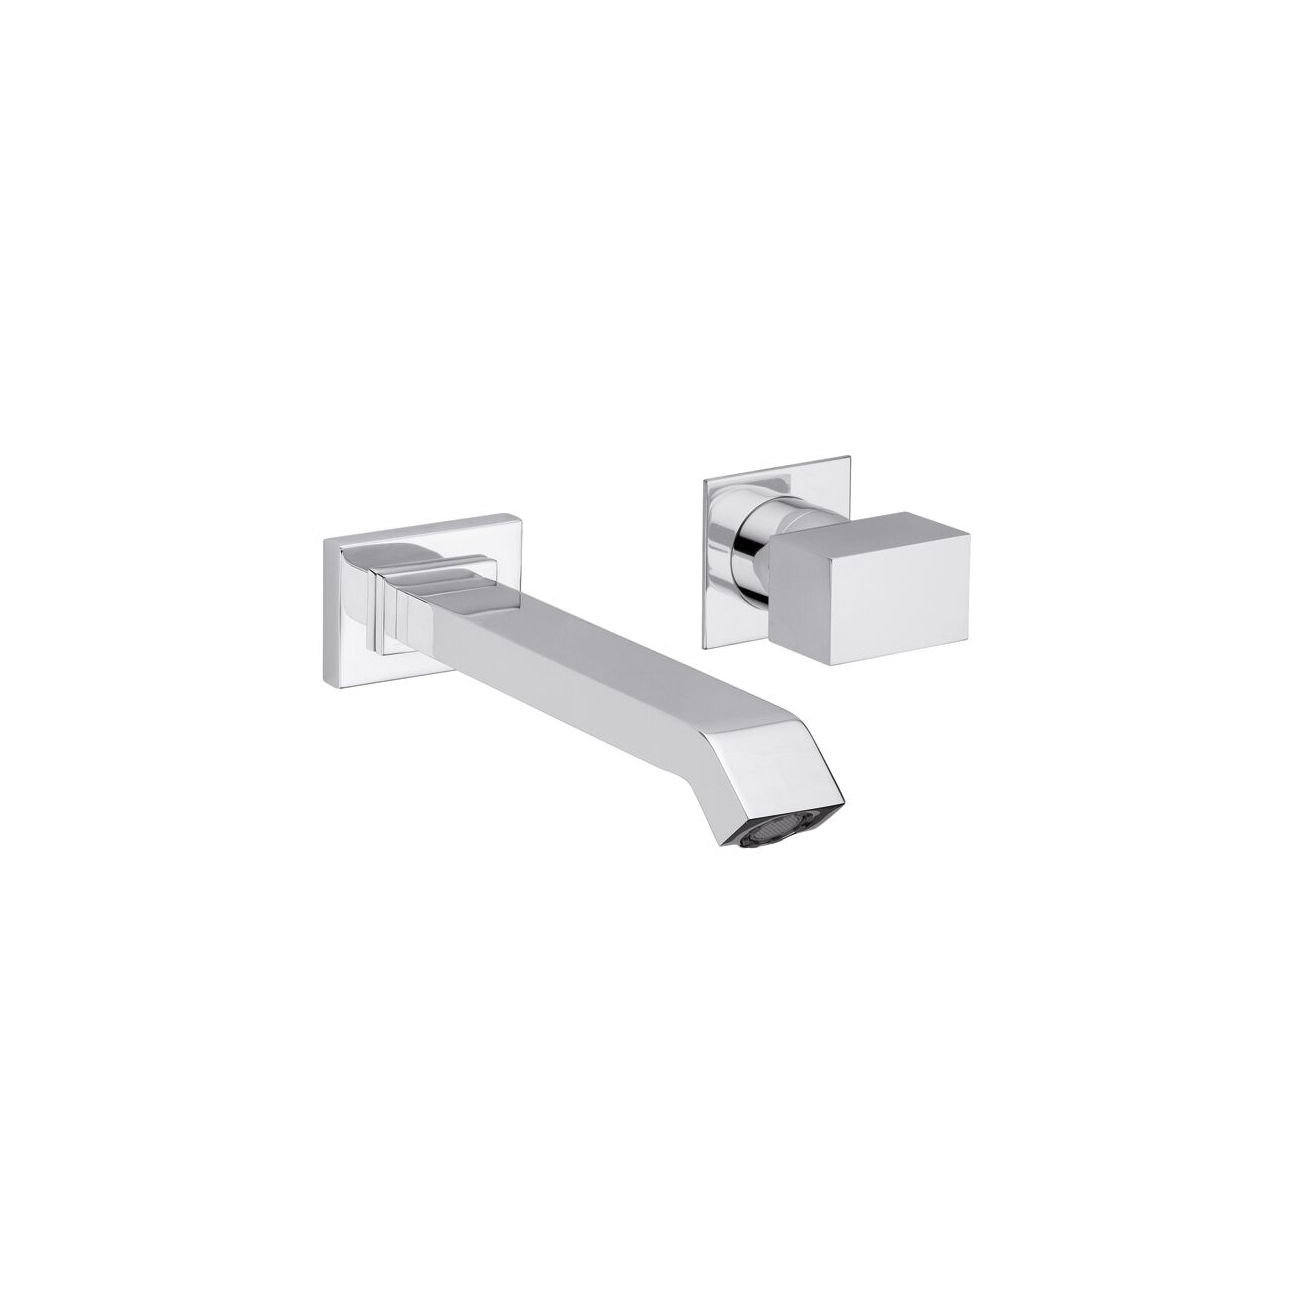 BELLOSTA T-LUX WALL MOUNTED BASIN MIXER